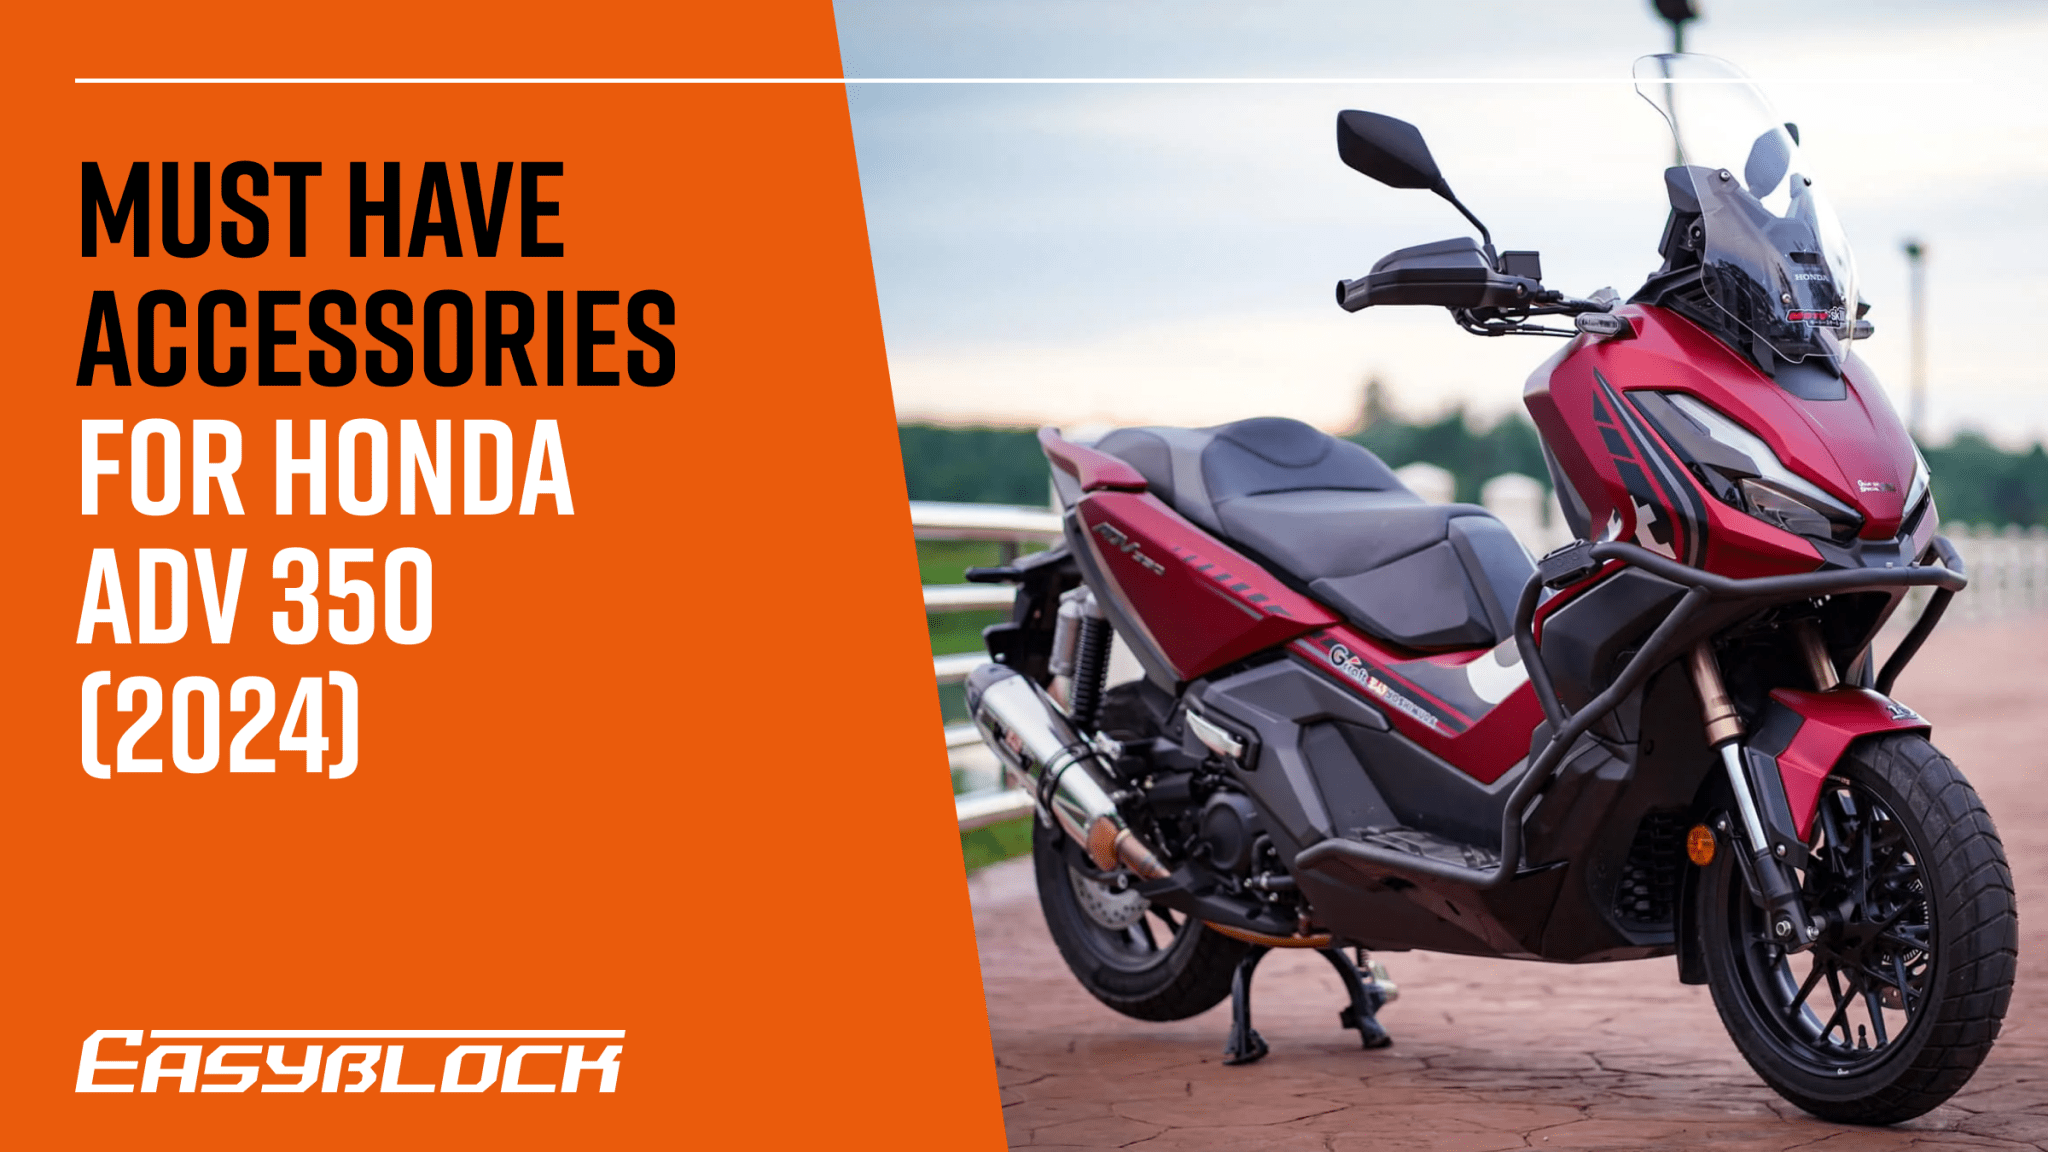 Must Have Accessories for Honda ADV 350 (2024 Edition) – EasyBlock